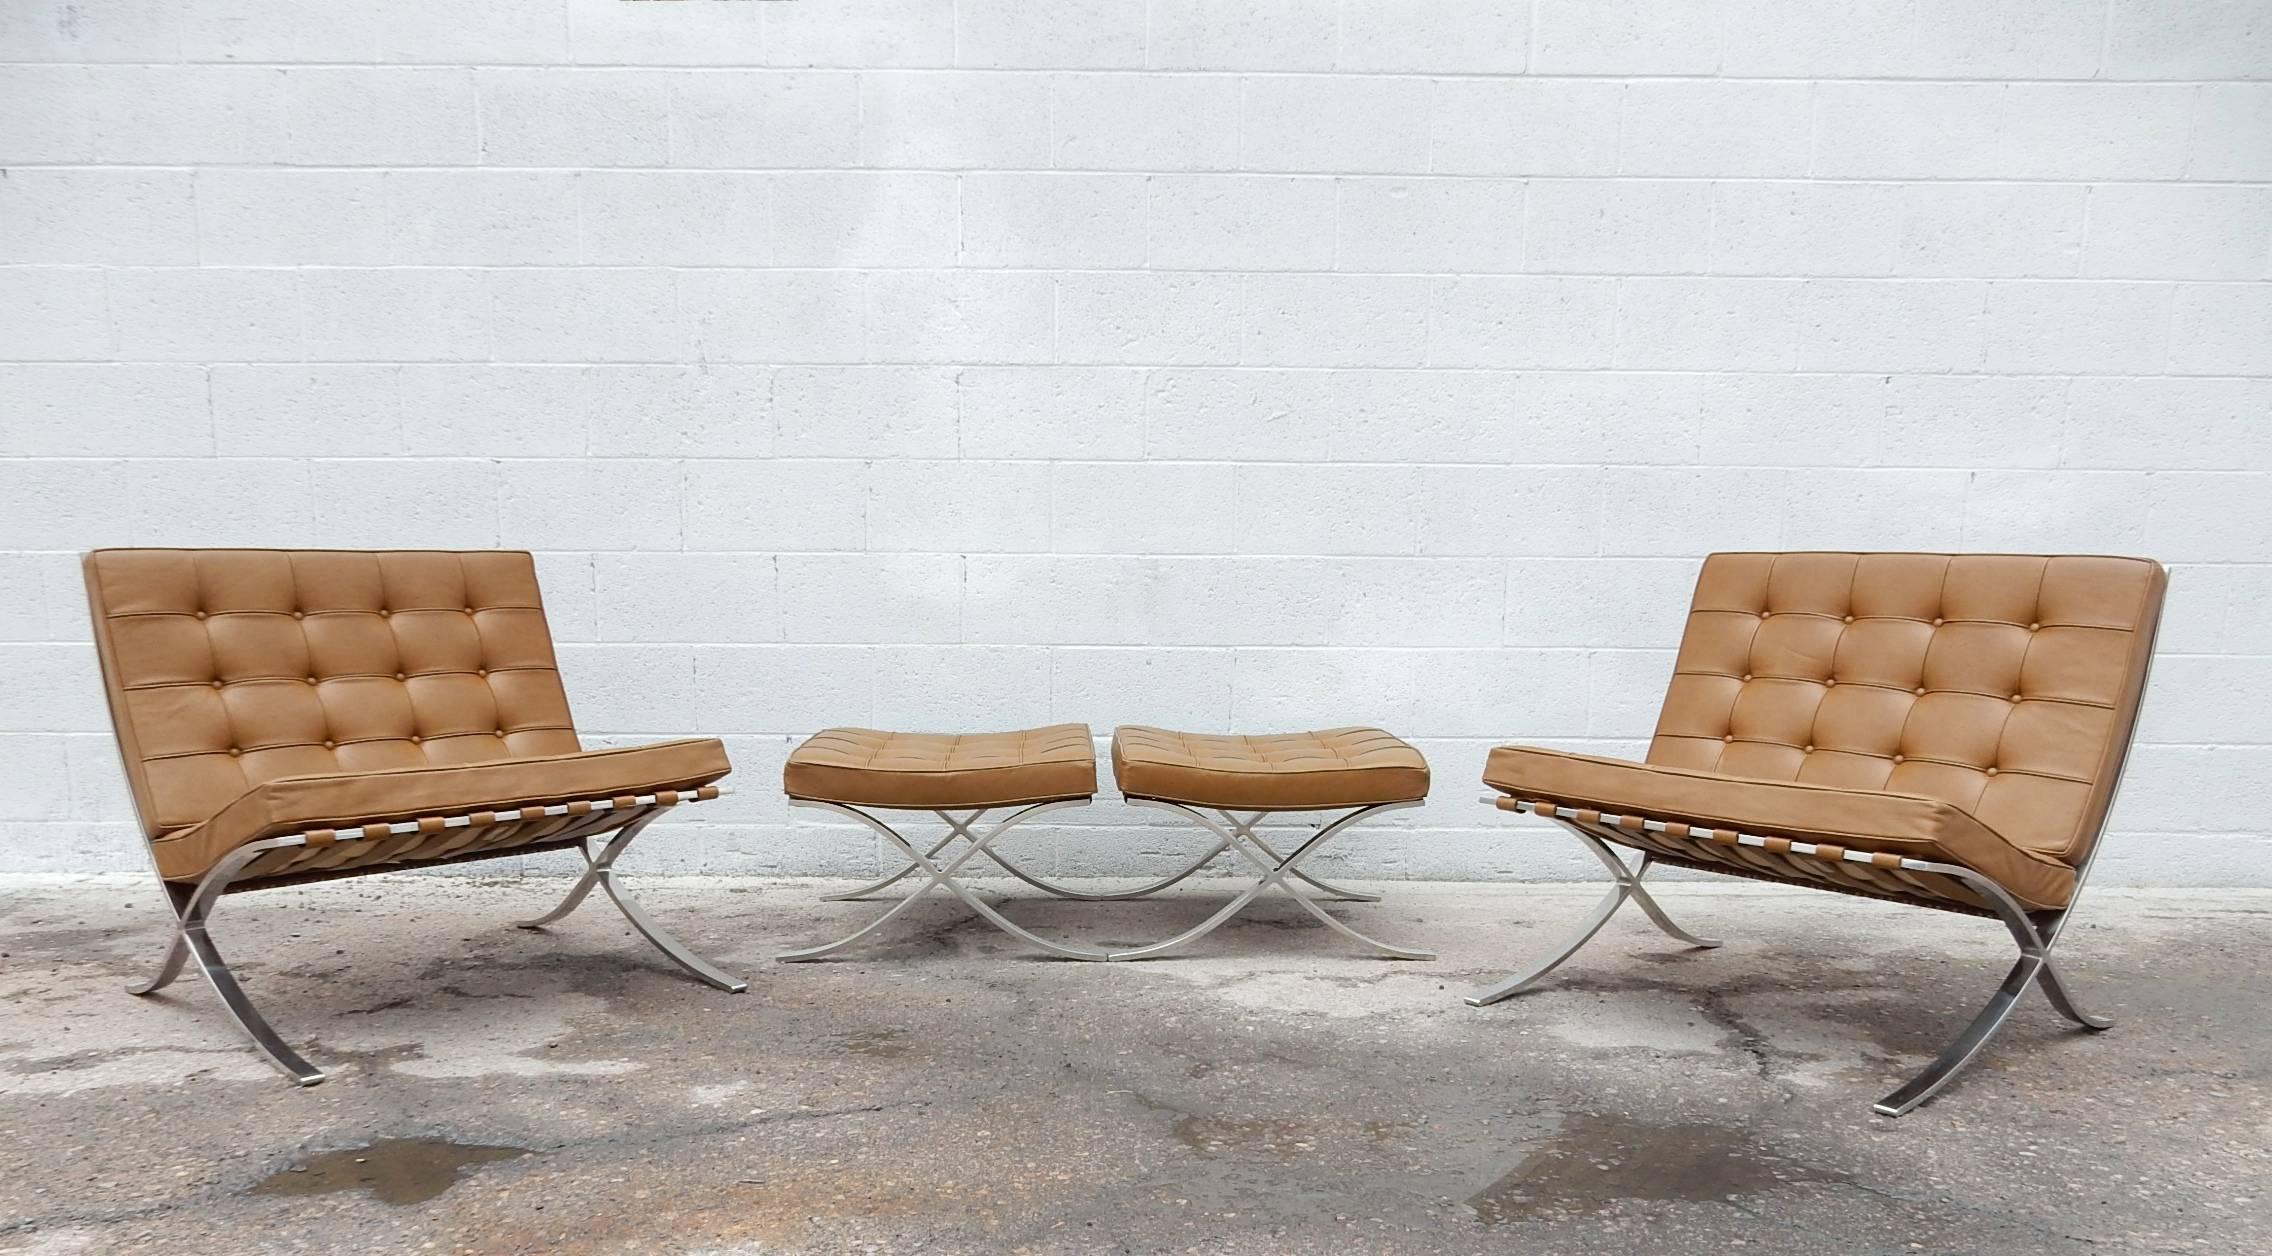 This set includes a pair of matching chairs and ottomans. 
All in excellent condition and completely original including the caramel brown spinnybeck leather.
Every piece is marked/labeled Knoll. Dated 1969.
They have all been painstakingly